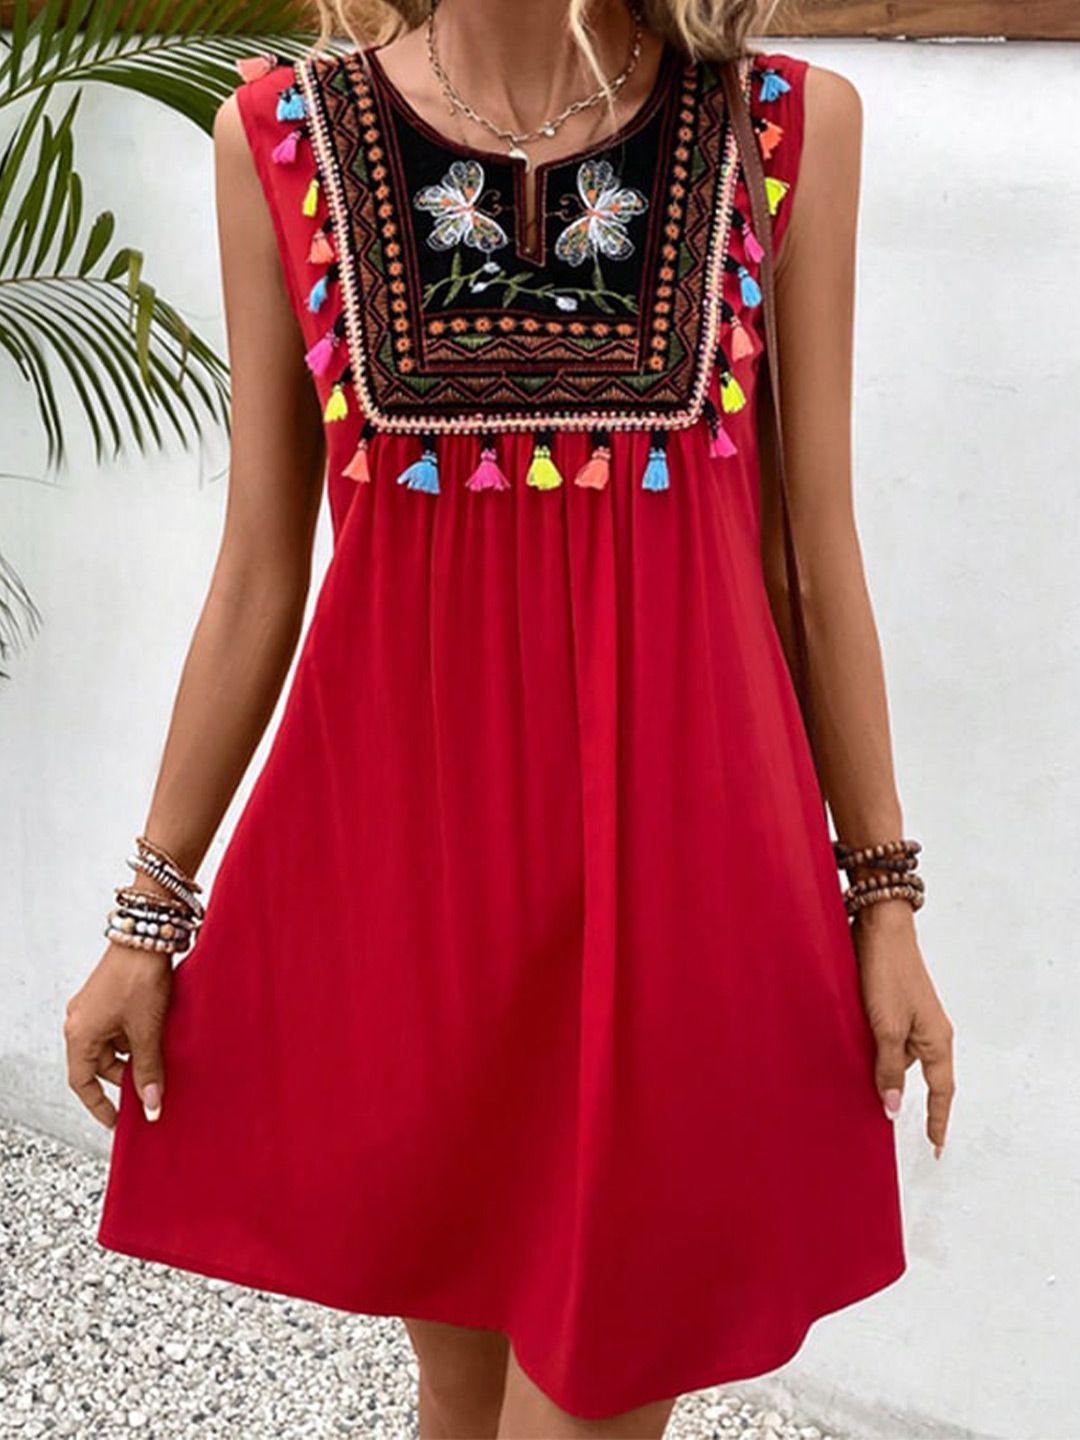 stylecast red & blood ethnic motifs embroidered fringed a-line dress